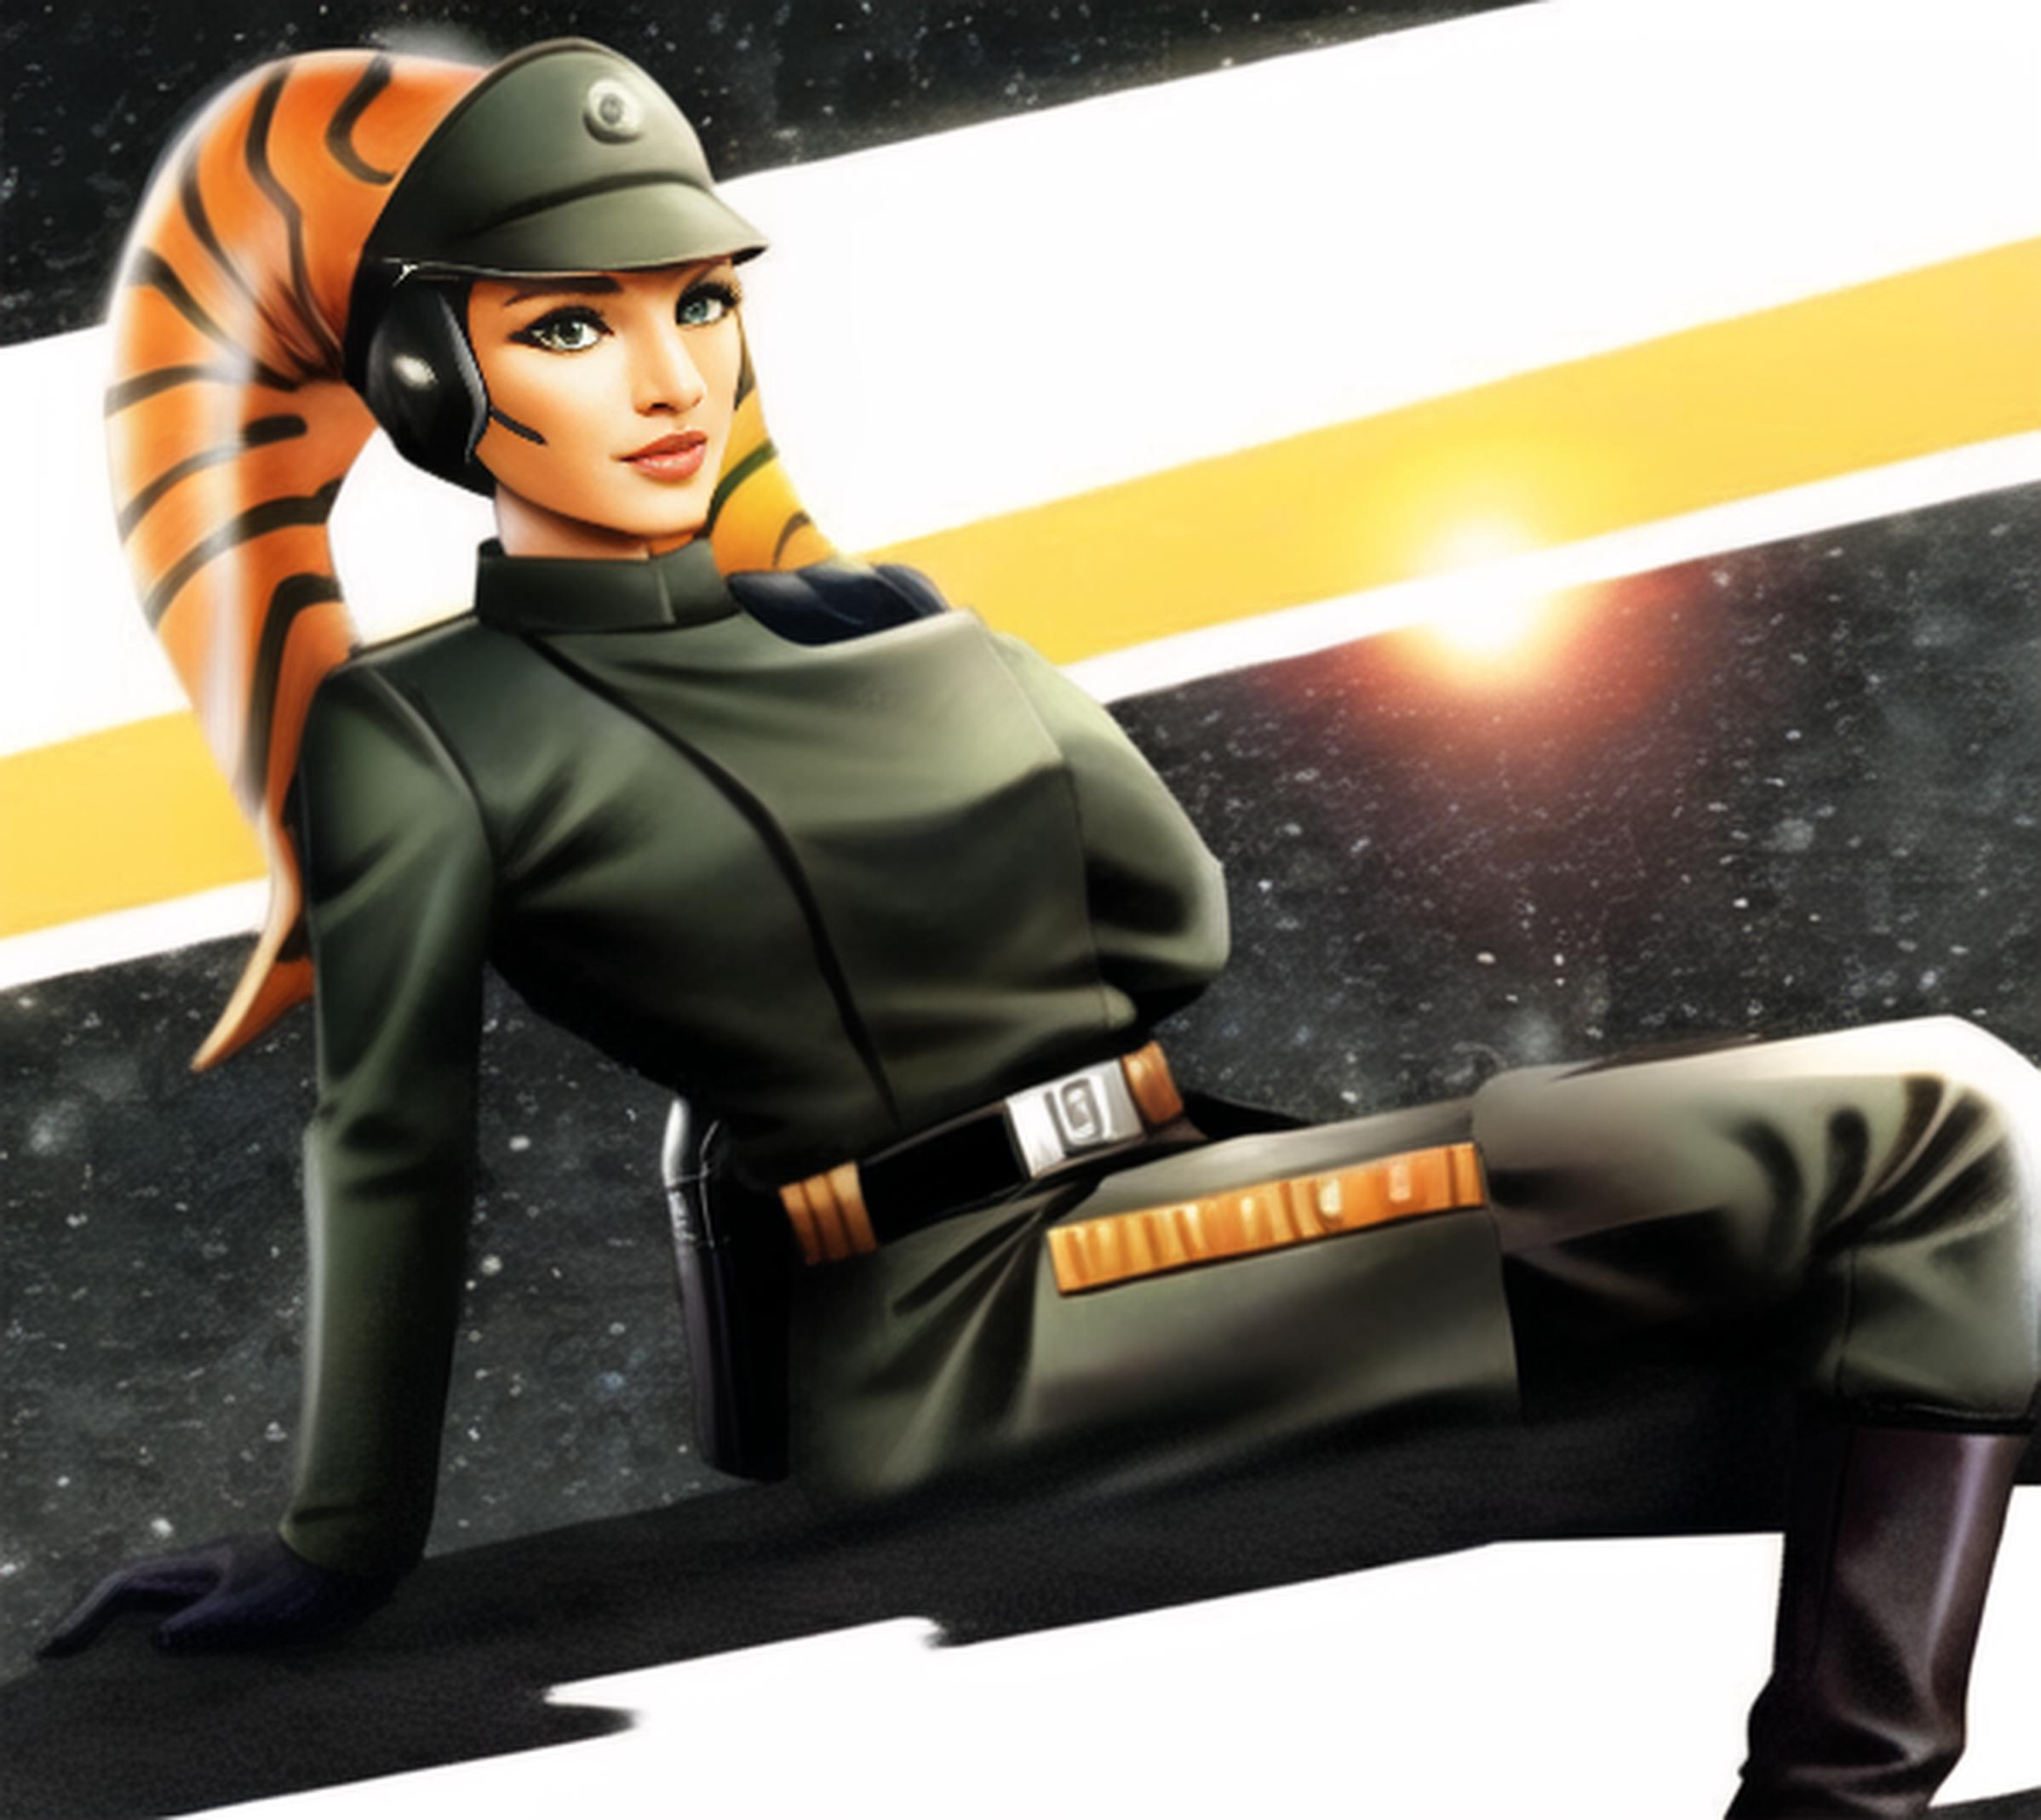 Star Wars imperial officer uniform image by twogunhacker753